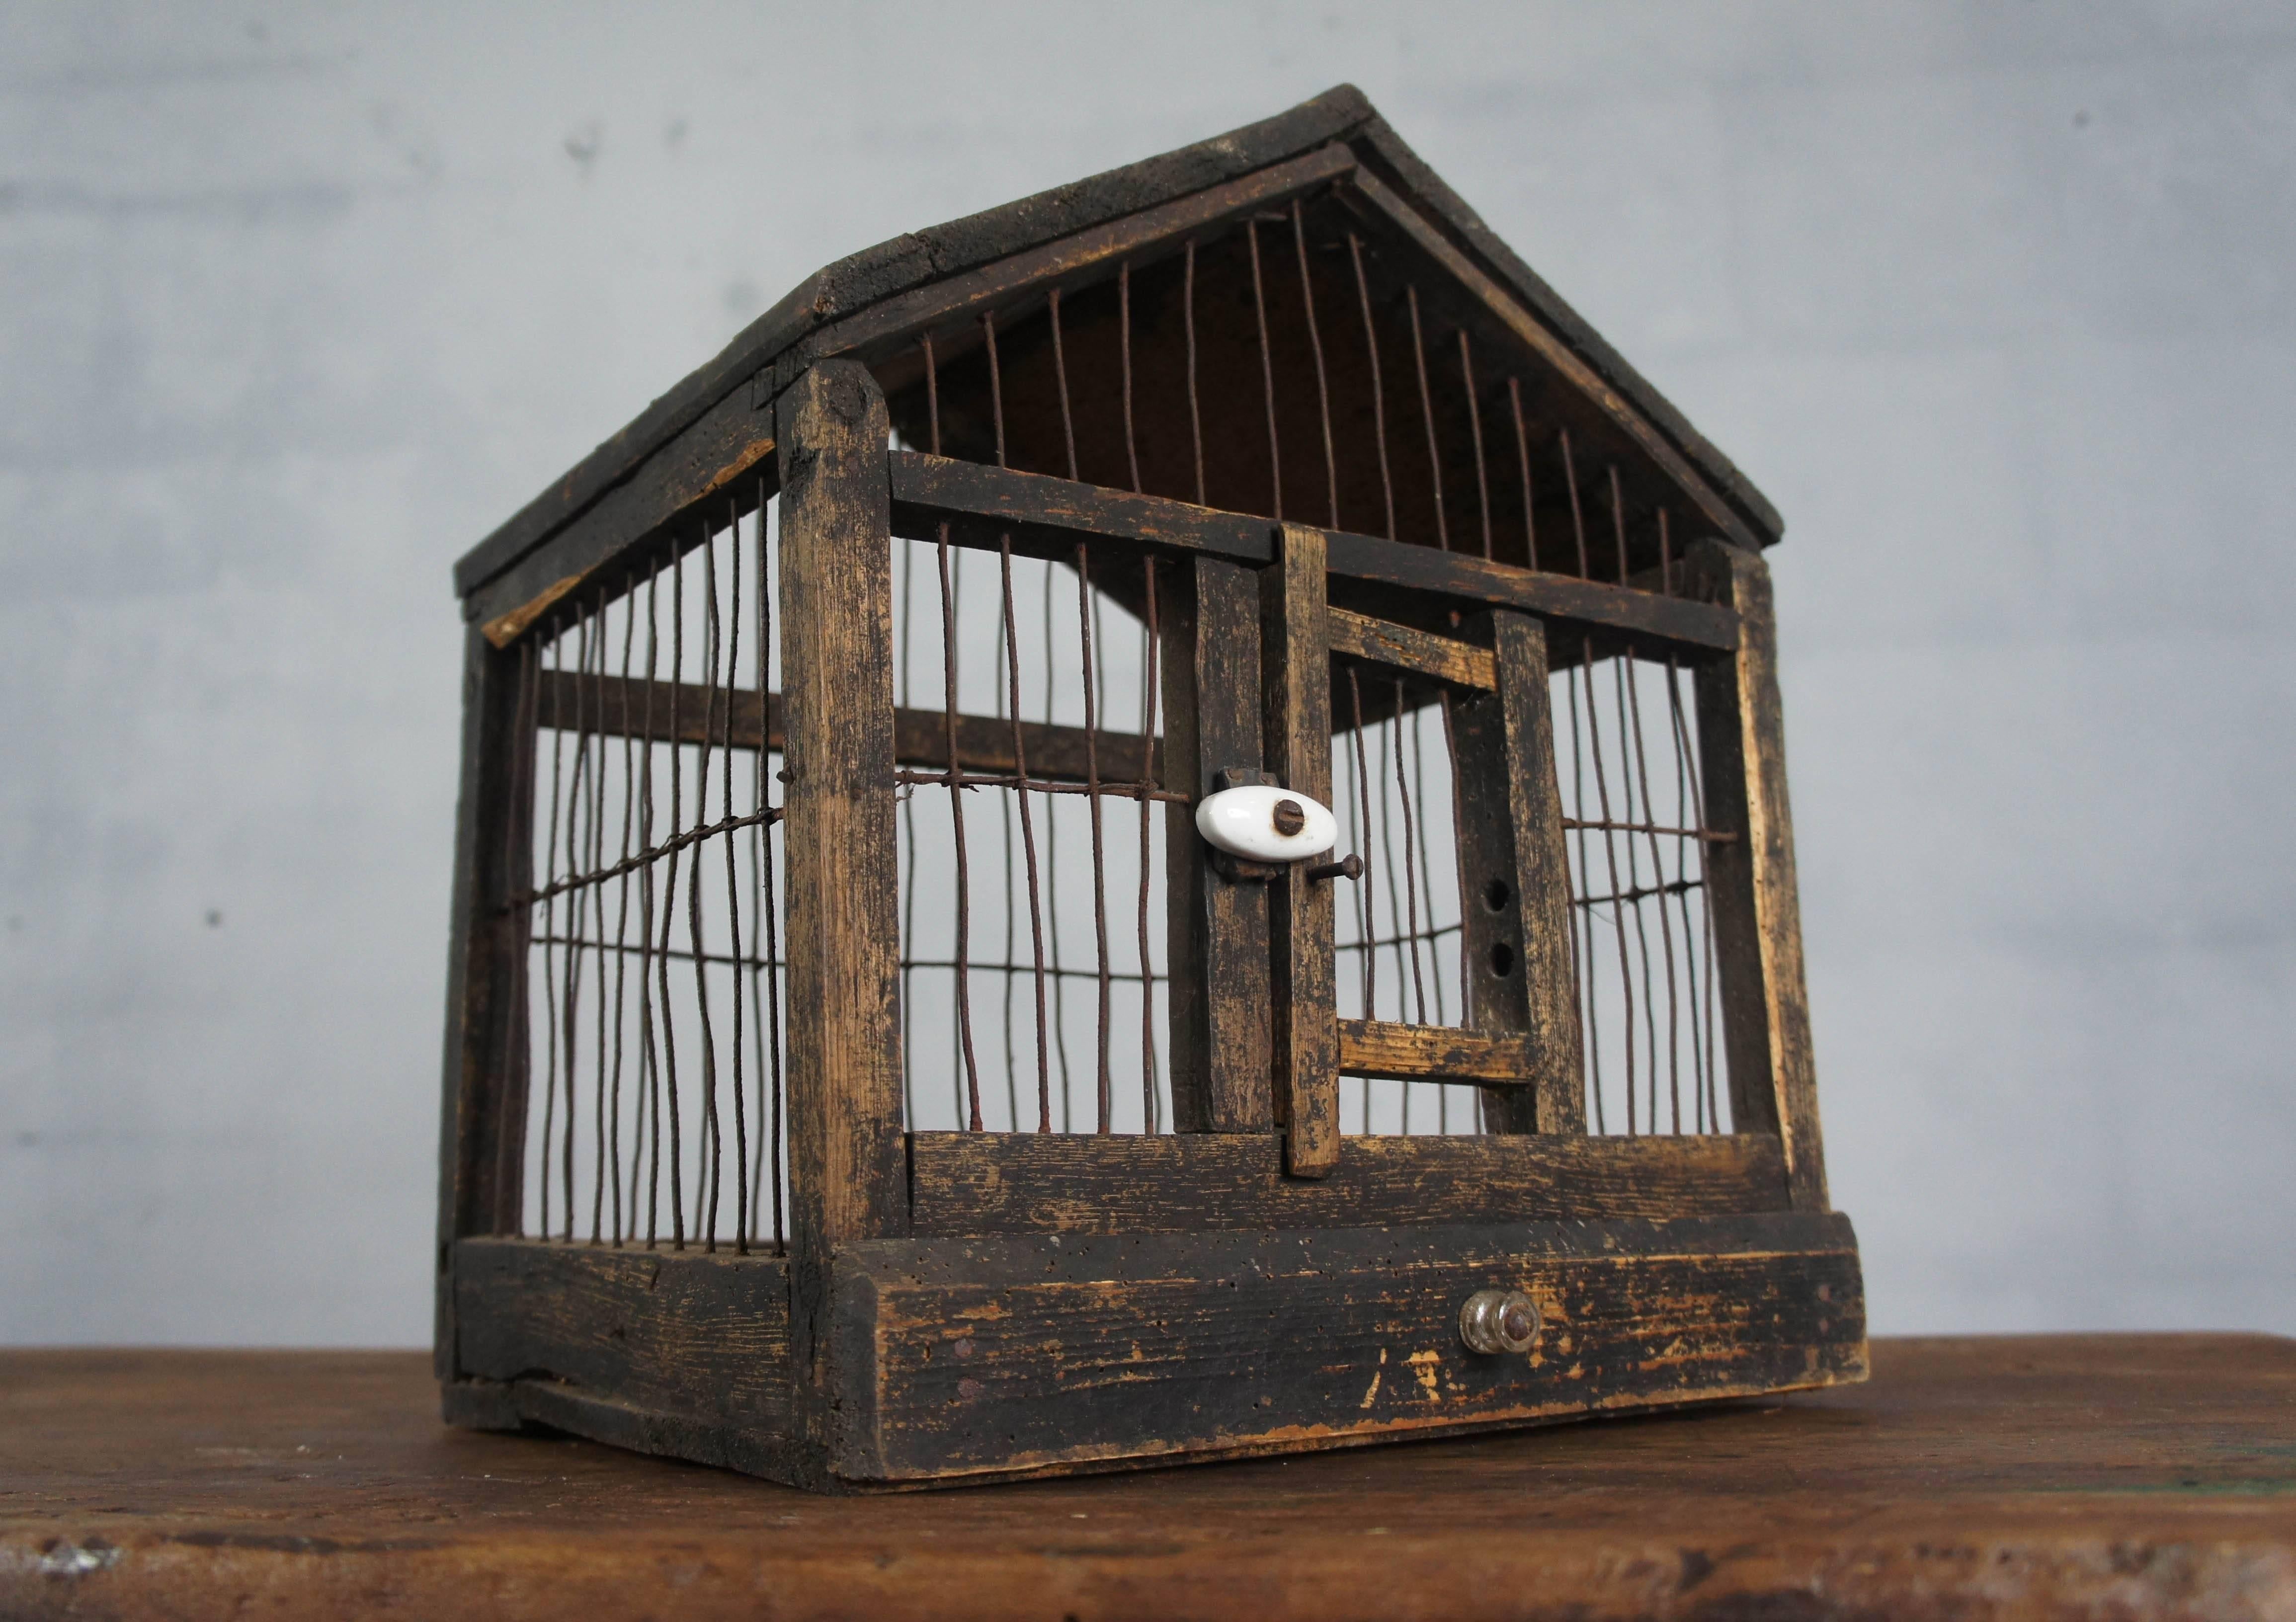 Provincial French indoor birdcage. Primitive wooden and wired detail with Fine porcelain handle. Often used to house songbirds this piece takes us back to an era where pleasure was found in simple things.